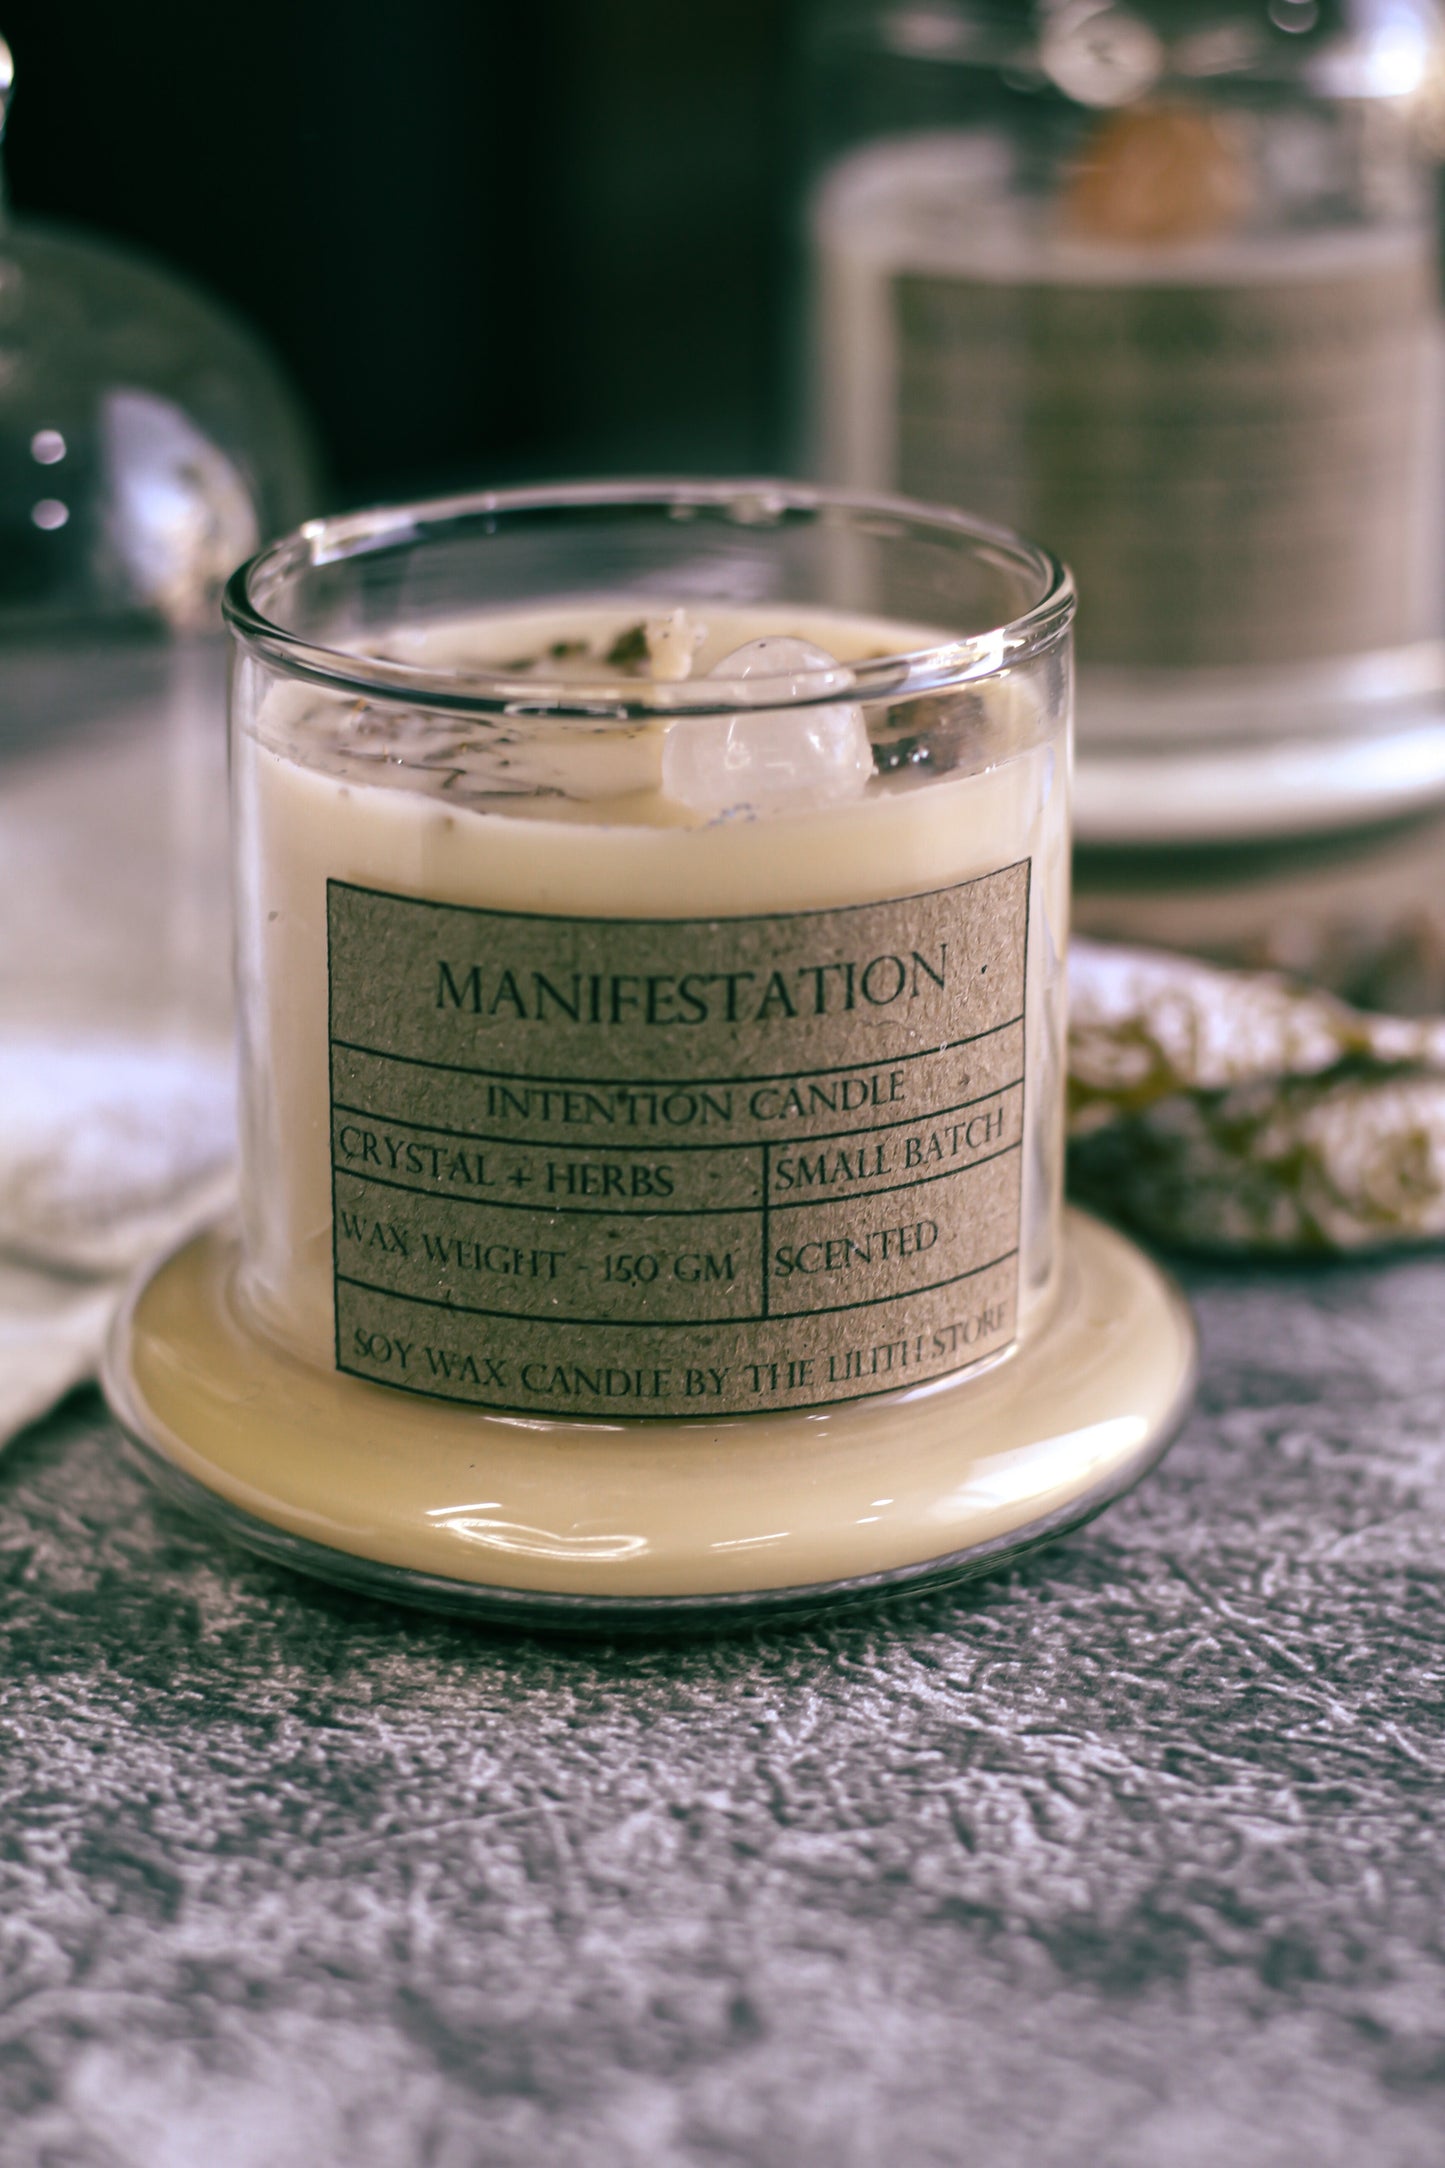 Manifestation Intention Candle Candles